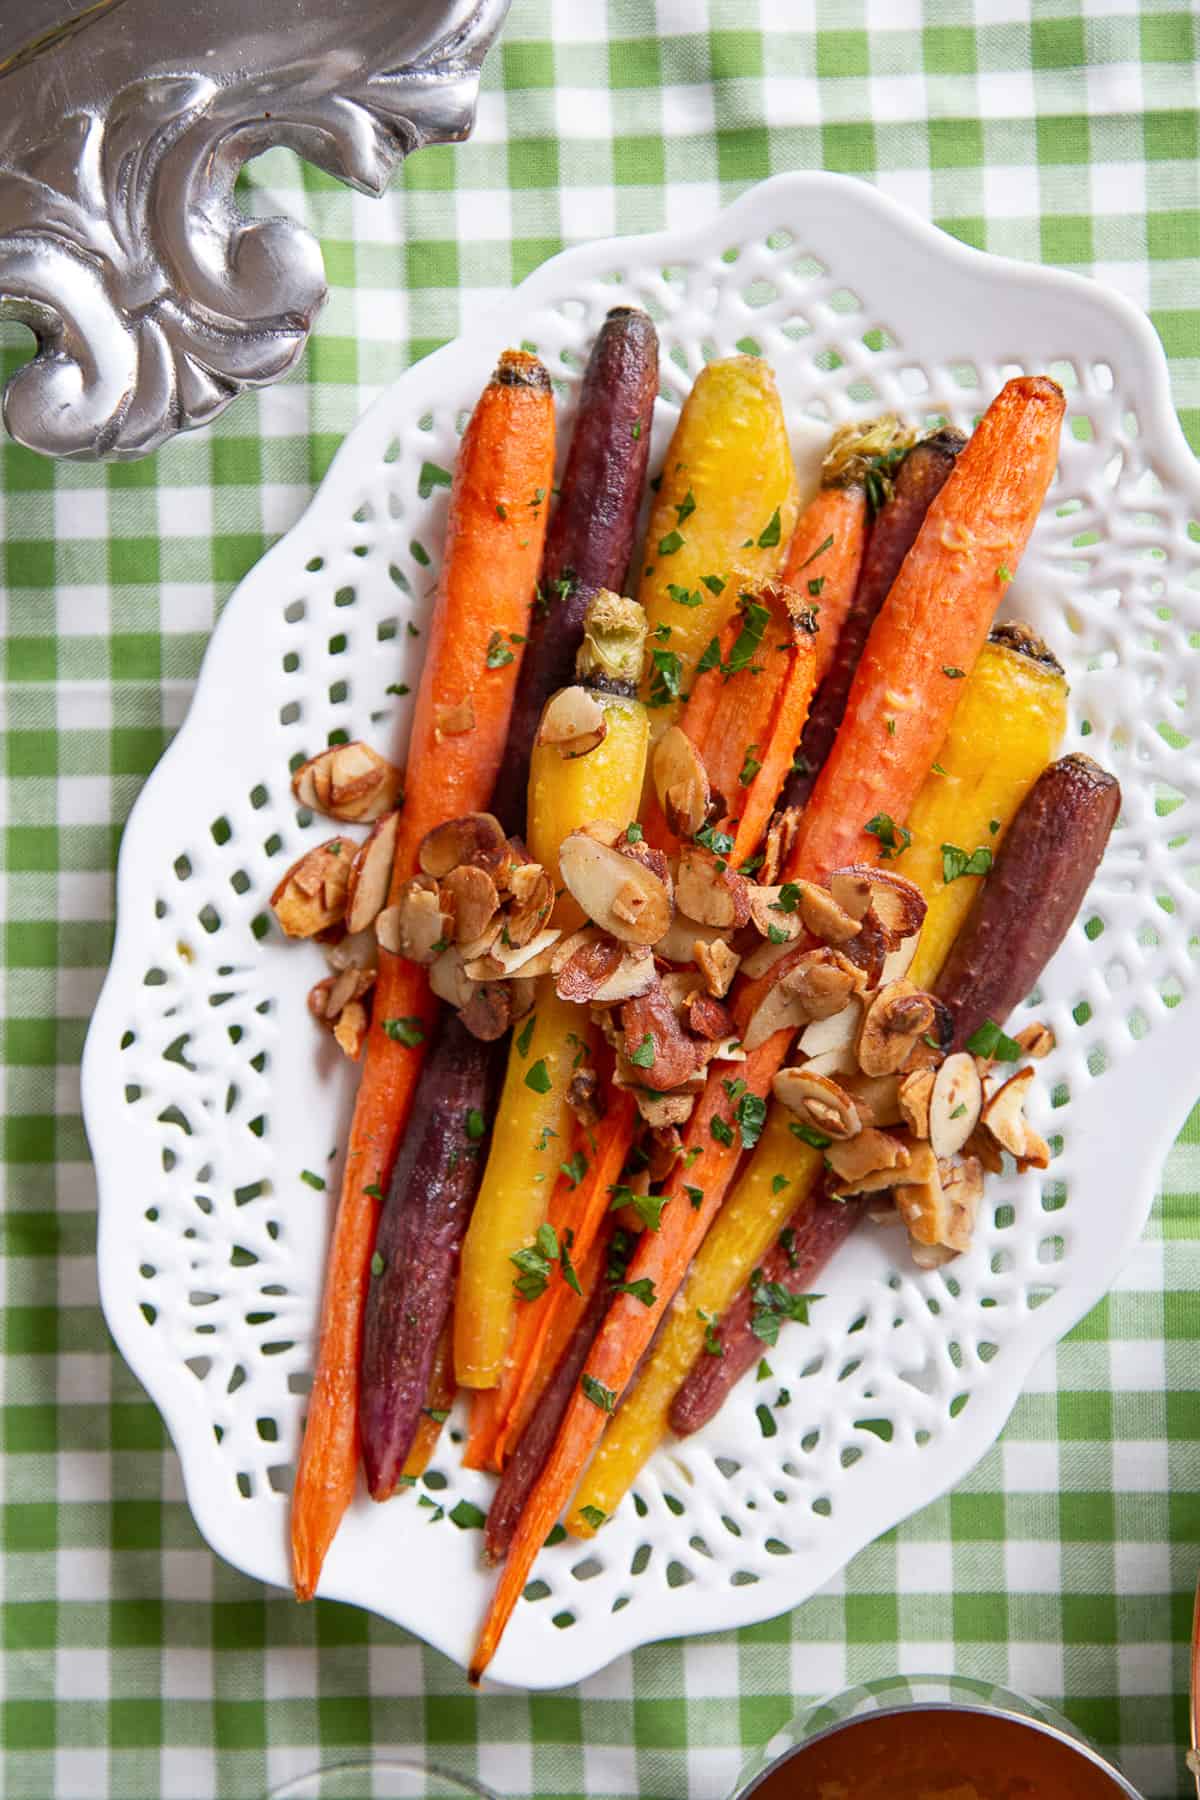 brown sugar glazed carrots on a white platter on a green gingham tablecloth.